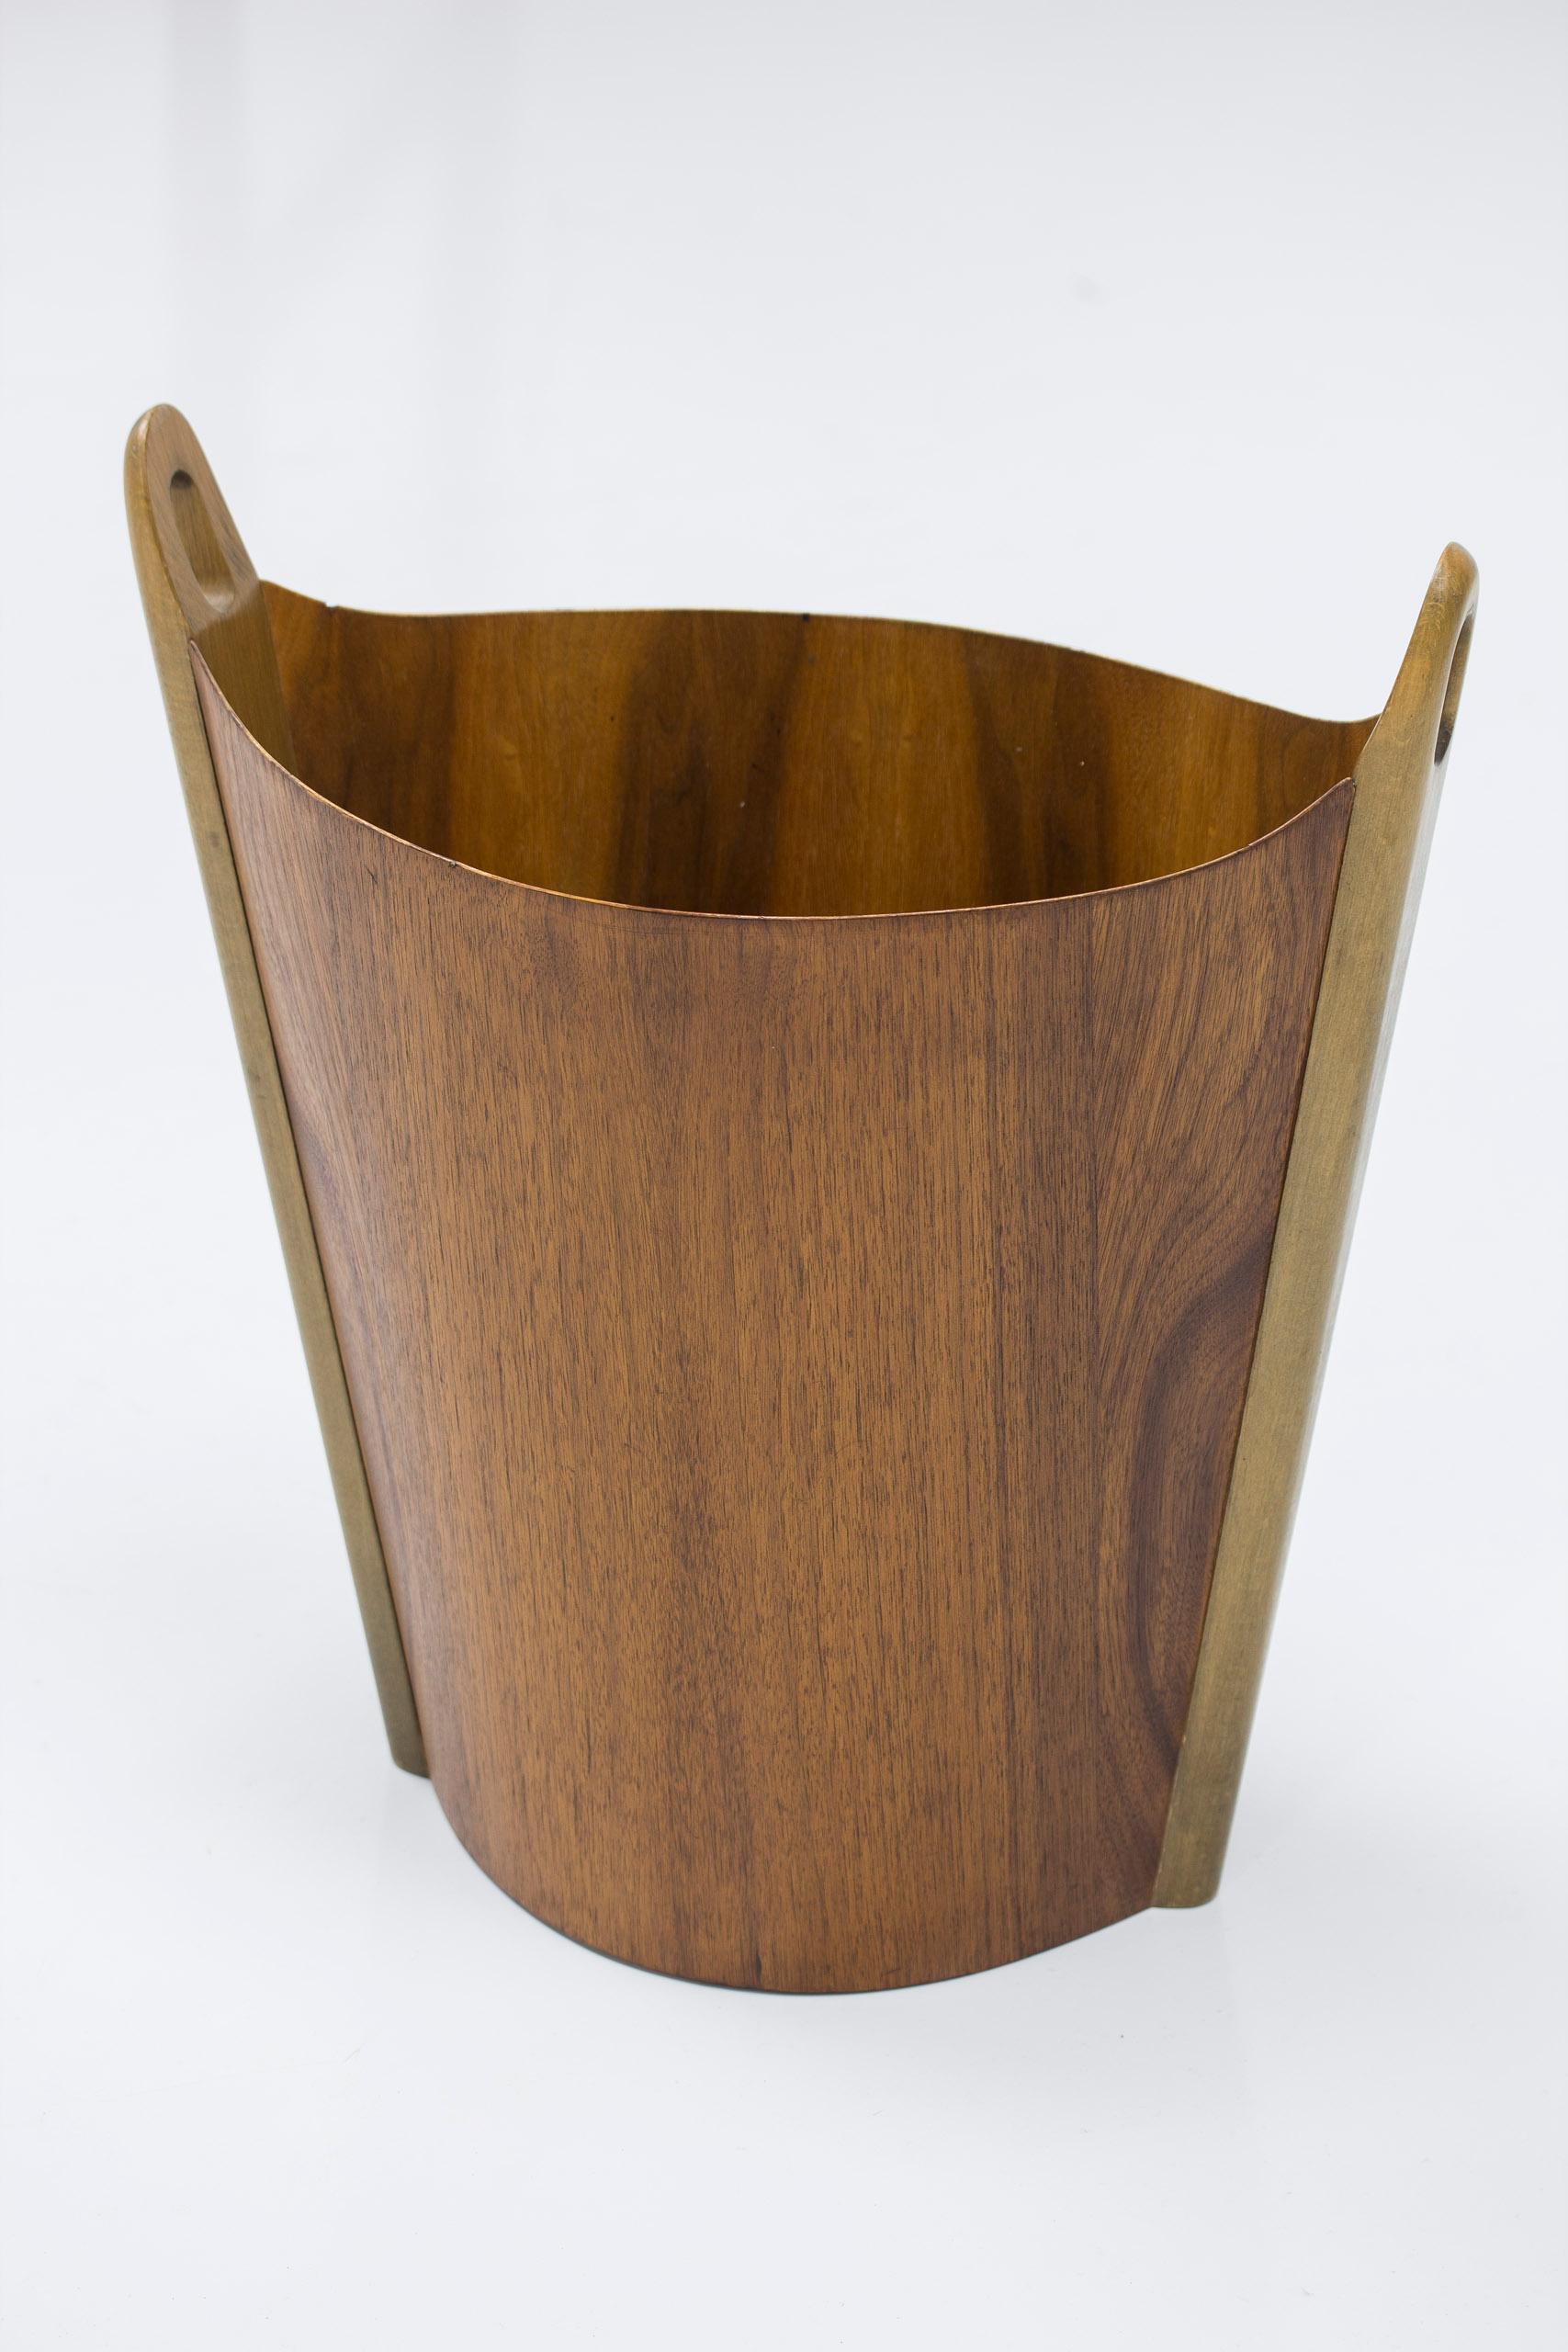 Wastepaper bin designed by Einar Barnes. Produced in Norway by PS Heggen during the 1950s. Made from laminated teak and beech wood. Very good vintage condition with age related wear and patina. 



Designer: Einar Barnes

Manufacturer: PS